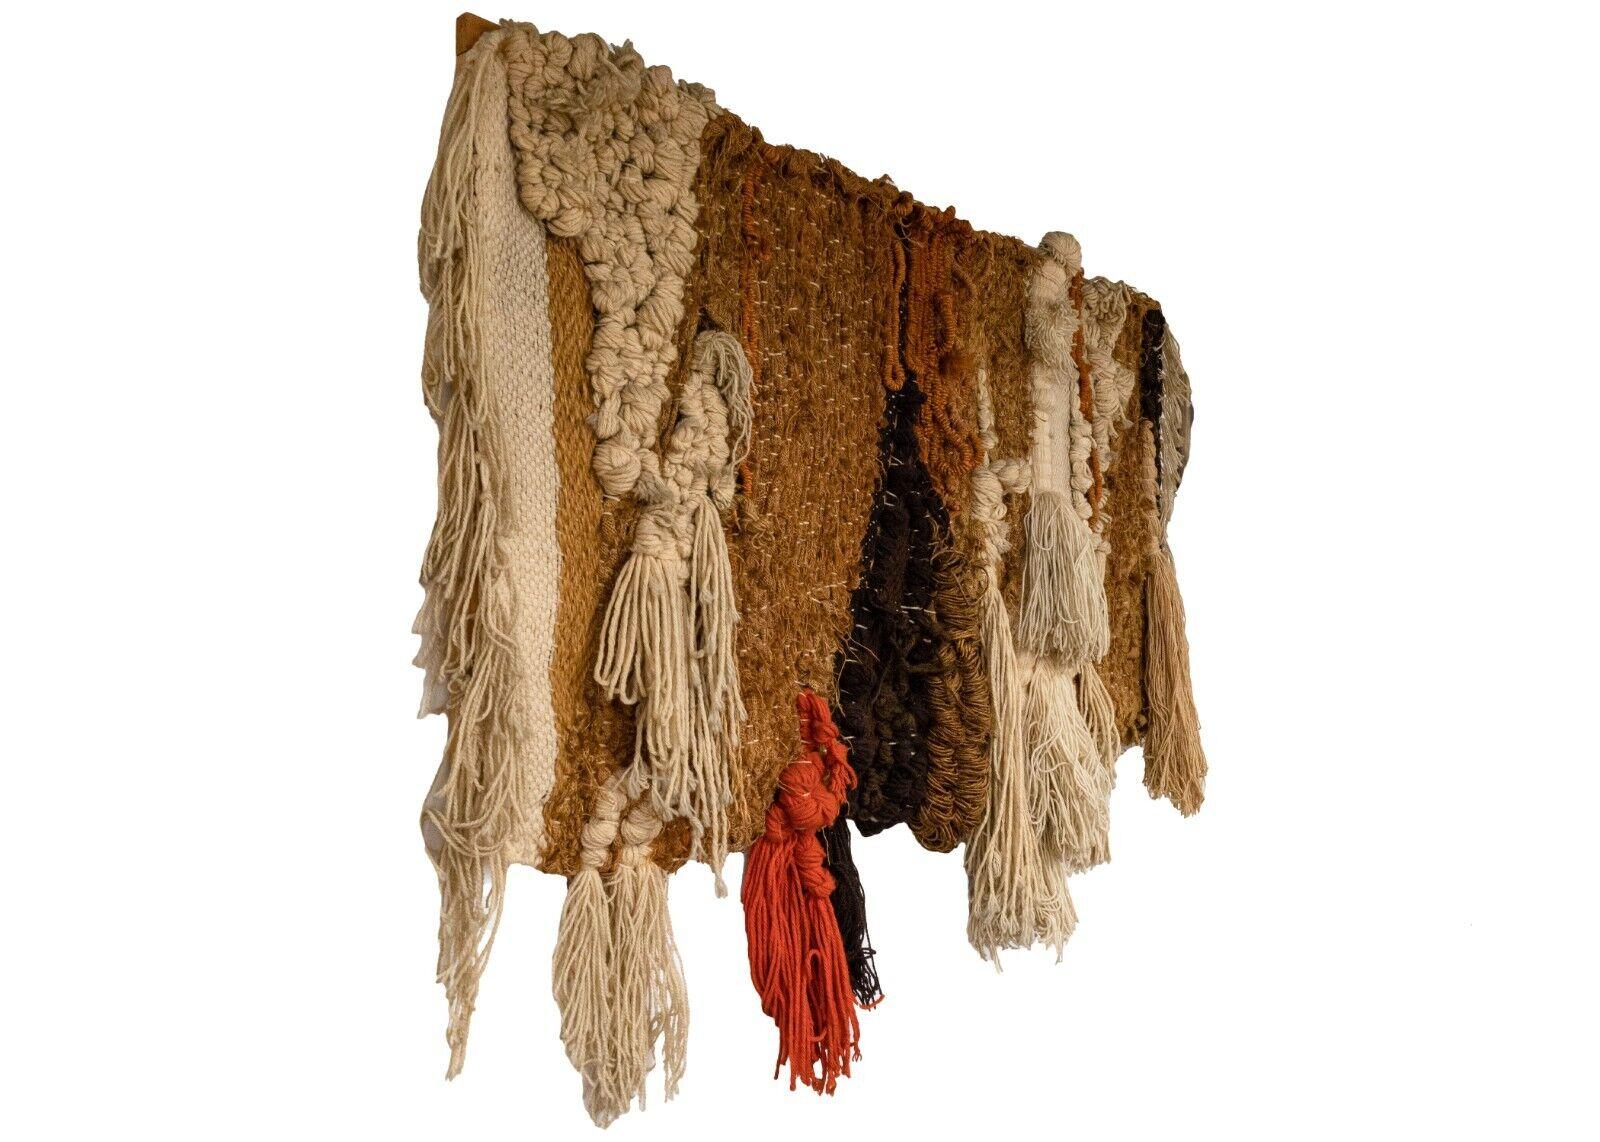 A magnificent, handwoven, abstract fiber wall art made with wool yarn, by Robert Kidd, circa 1970s. This textural art piece in brown earth tones and retro orange makes a unique statement artwork for a modern or contemporary designed space.